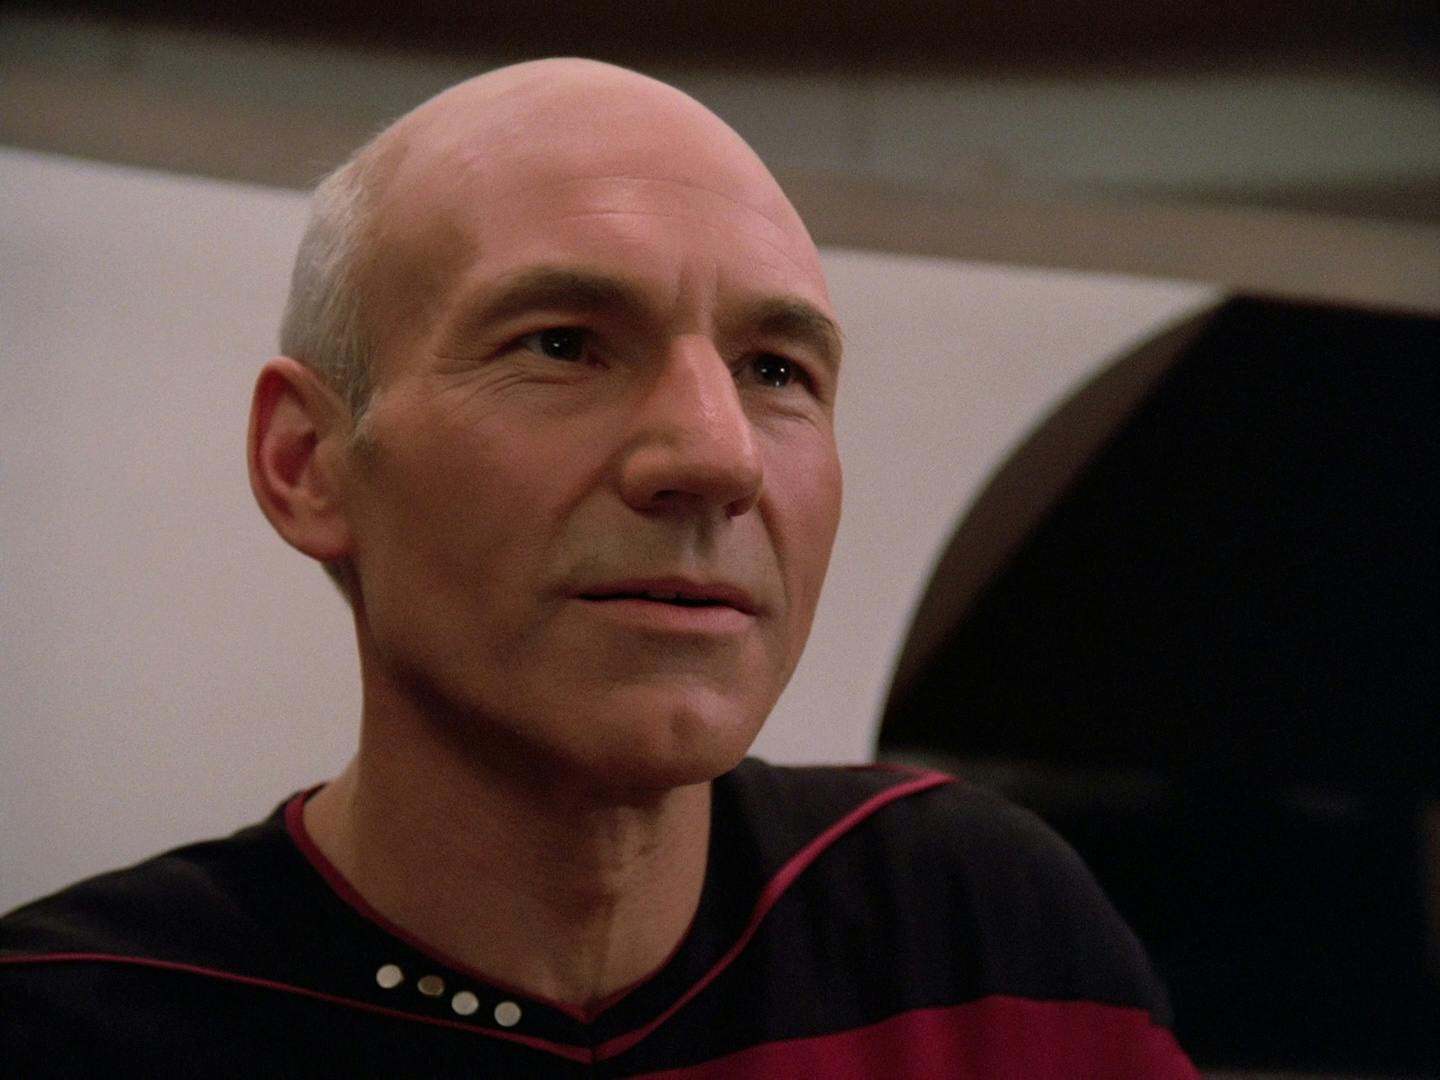 Closing shot of Captain Jean-Luc Picard looking at the Enterprise-D's viewscreen awaiting what lies ahead on their five year journey in 'Encounter at Farpoint'